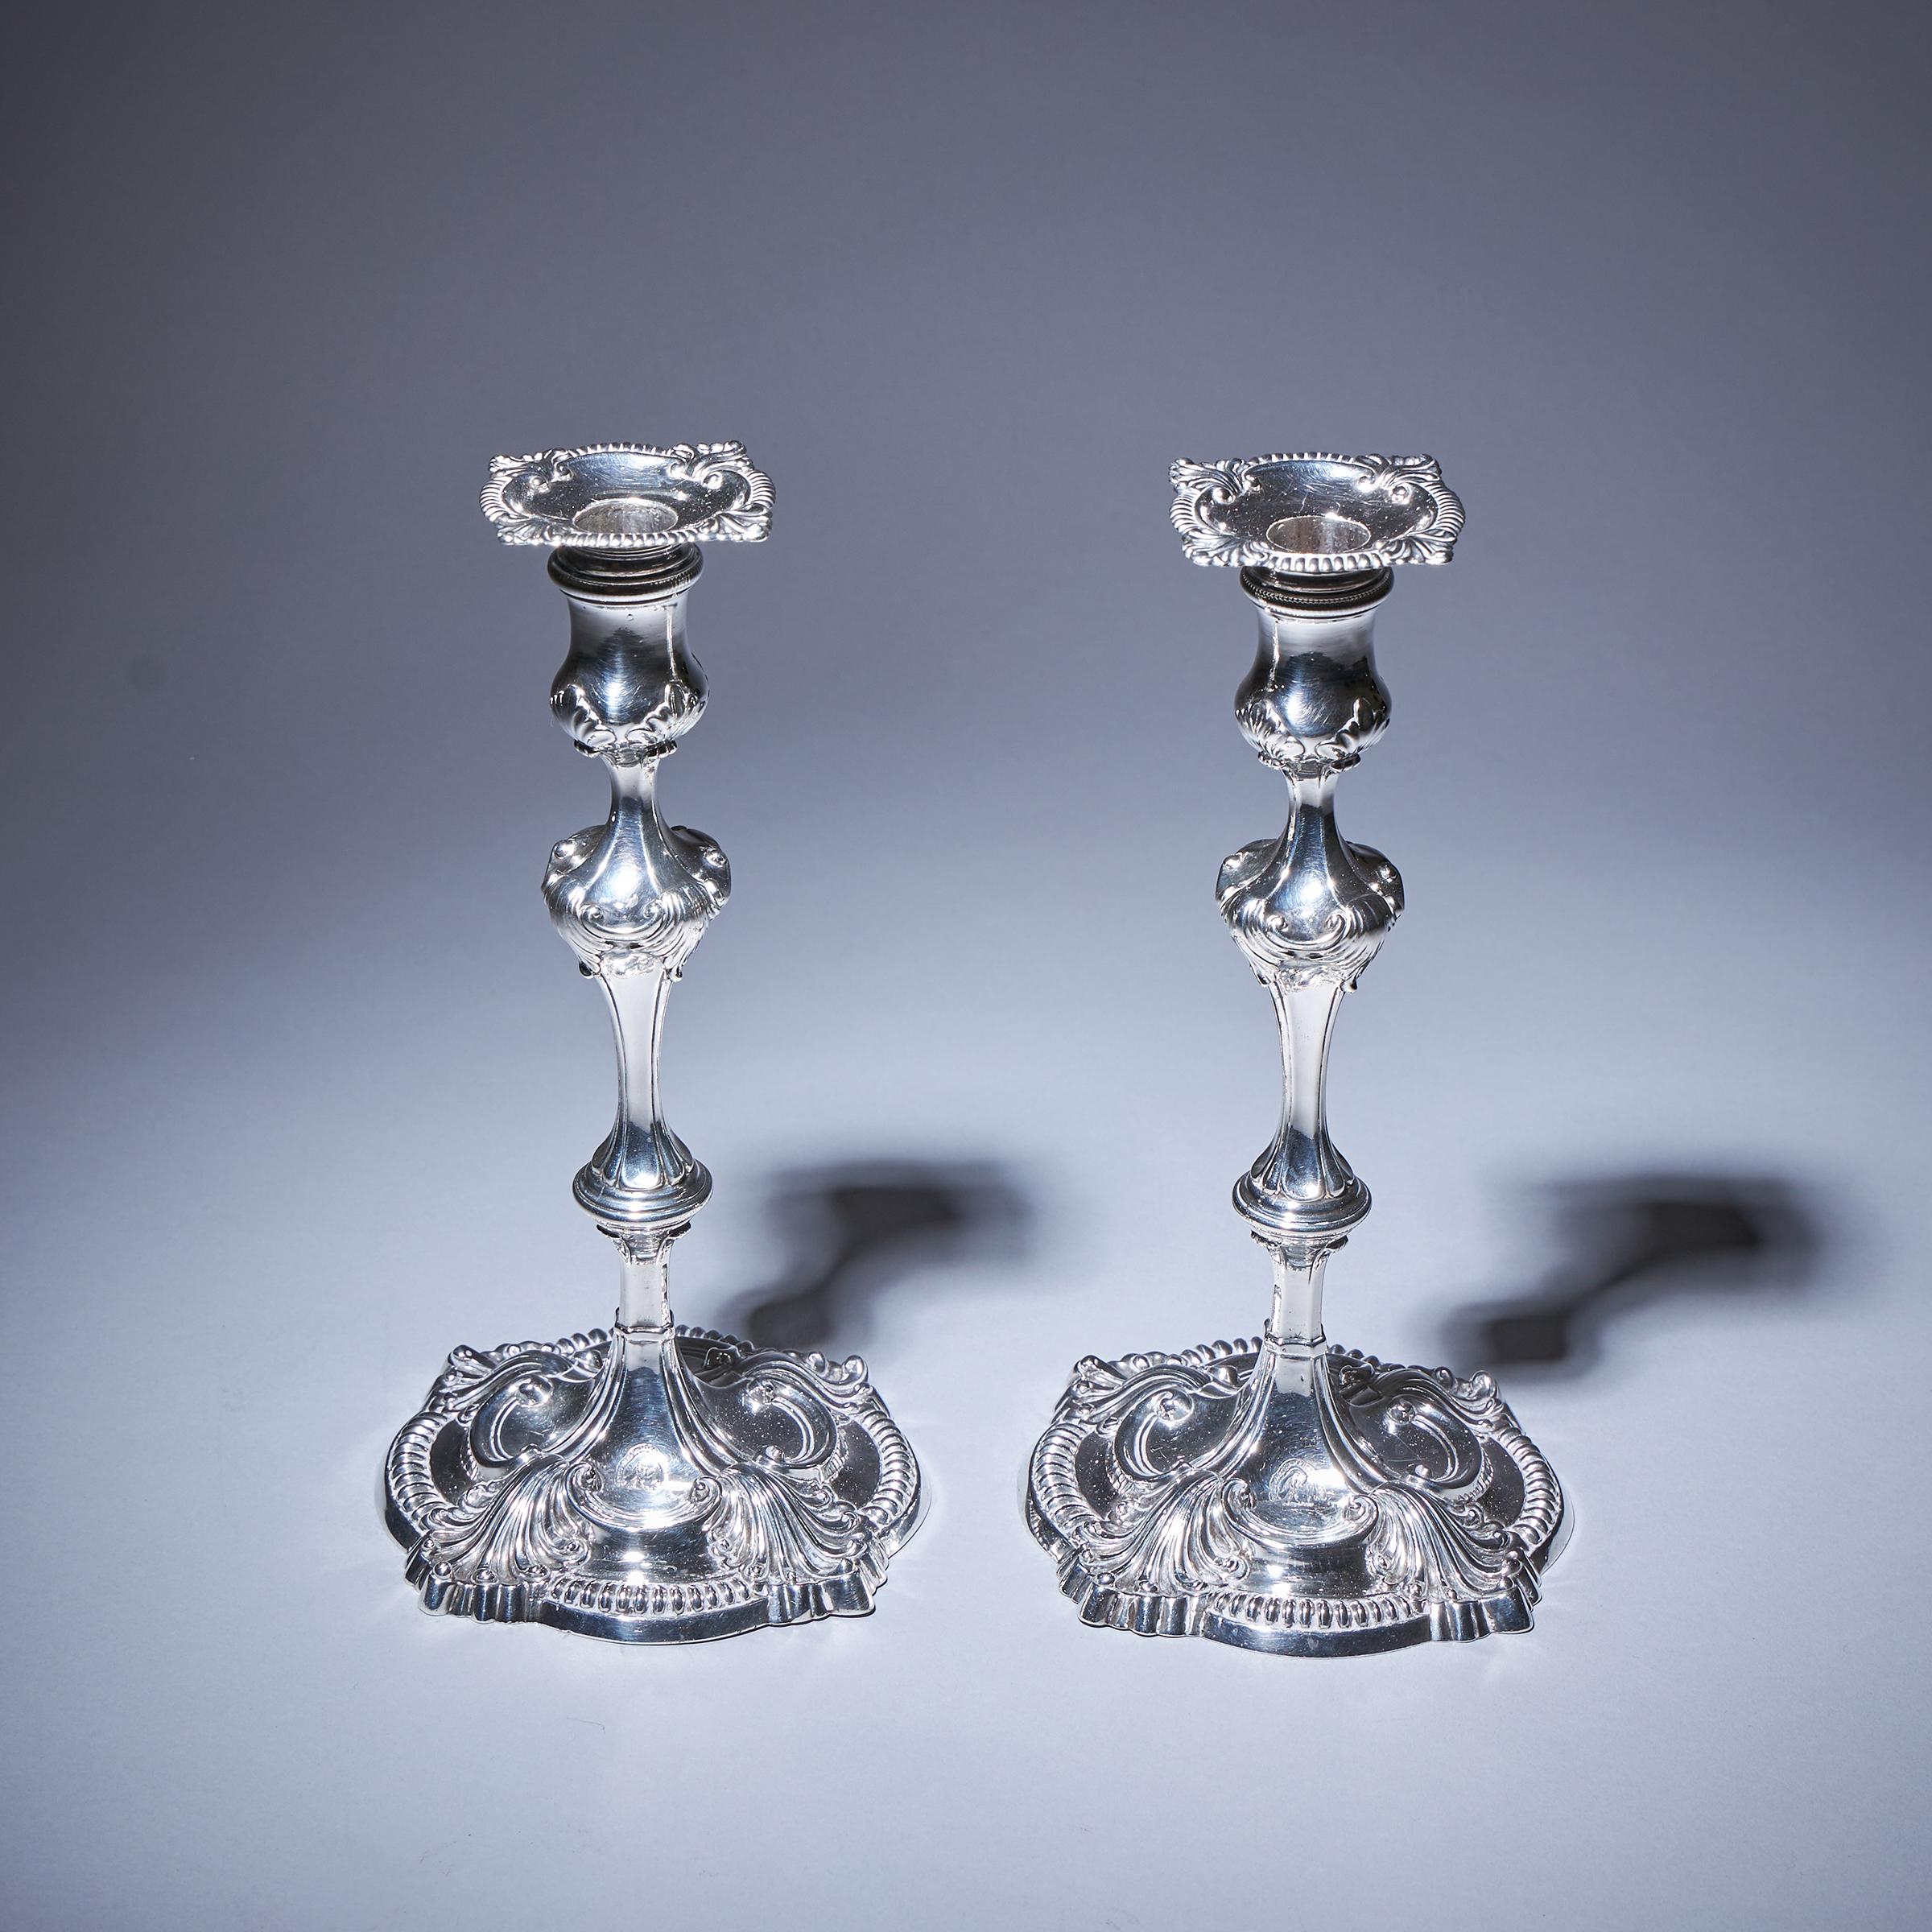 English Pair of 18th Century George III Silver Candlesticks by David Bell, London, 1762 For Sale